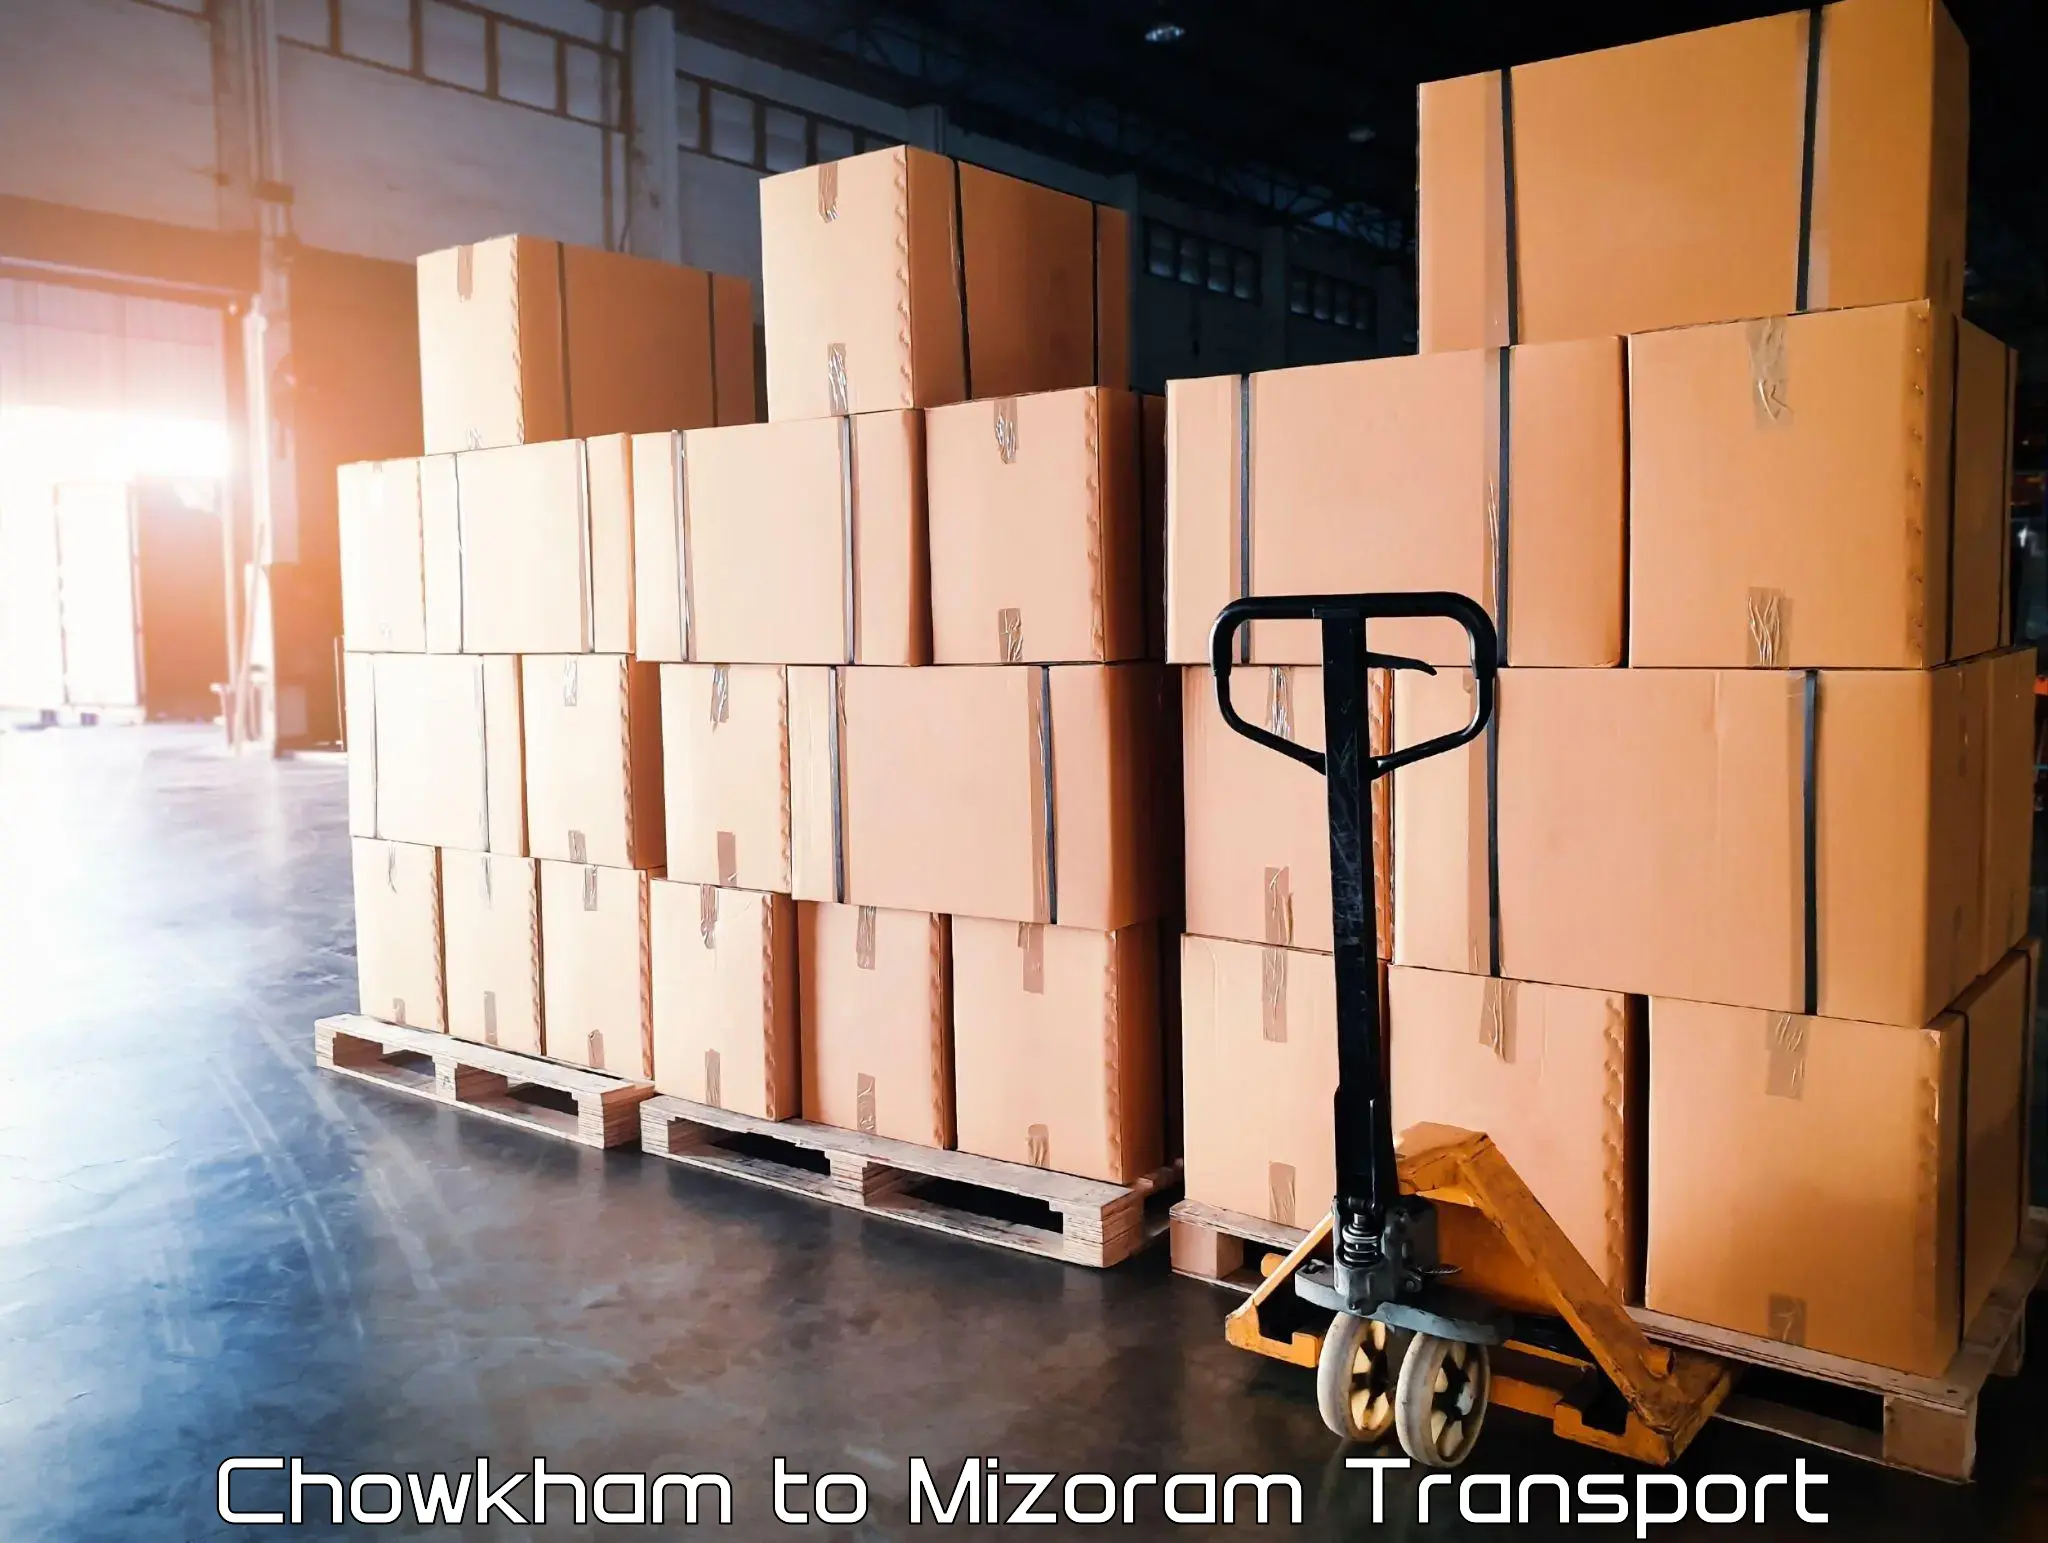 Land transport services in Chowkham to Aizawl